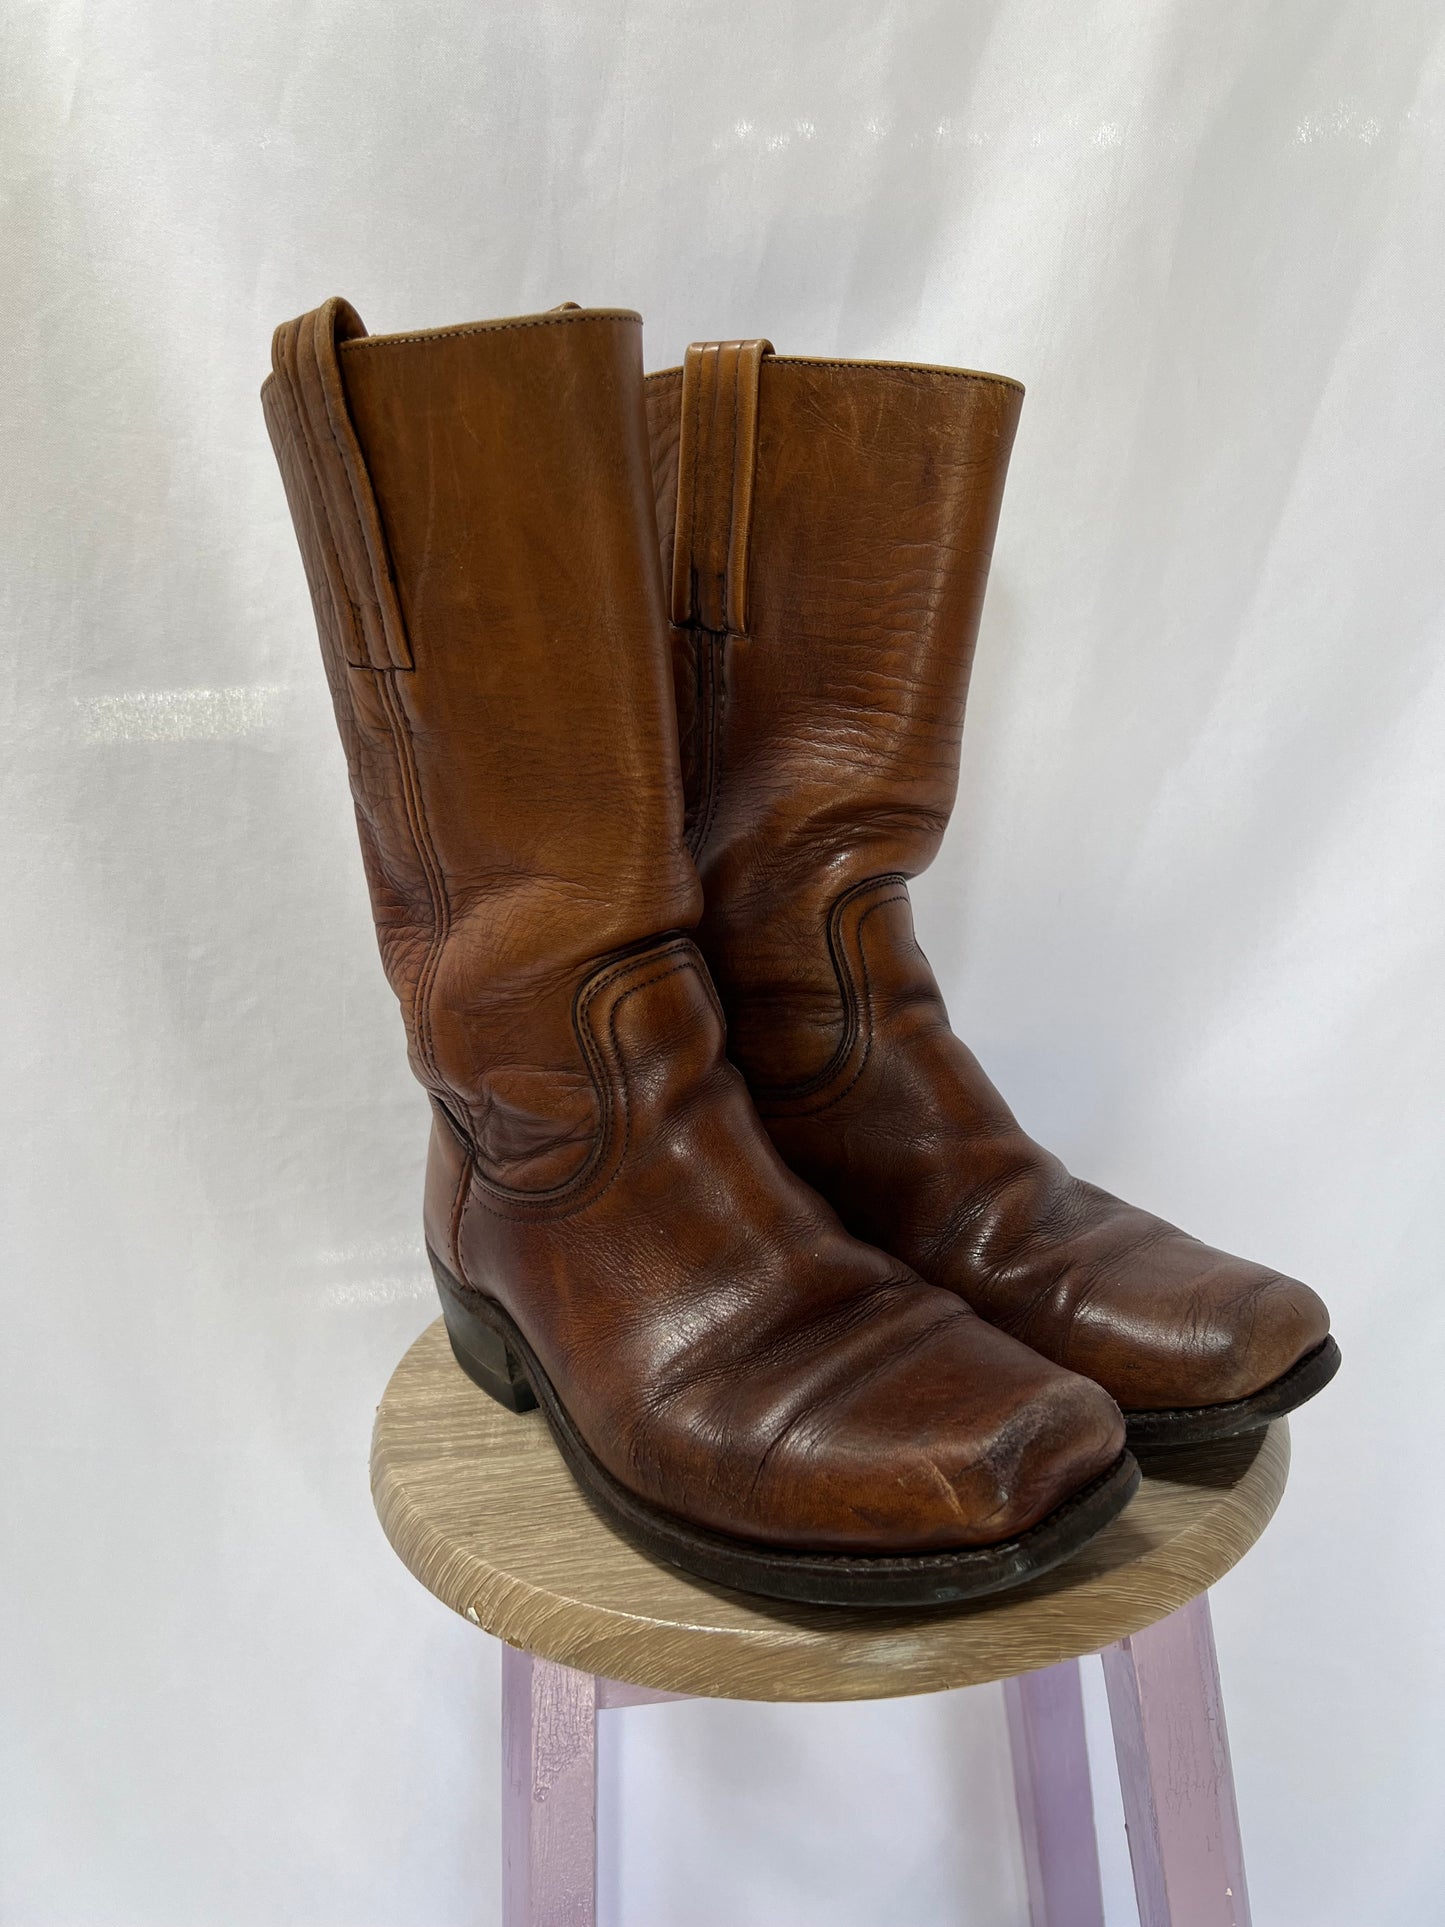 Vintage Frye Leather Boots - 8.5/9